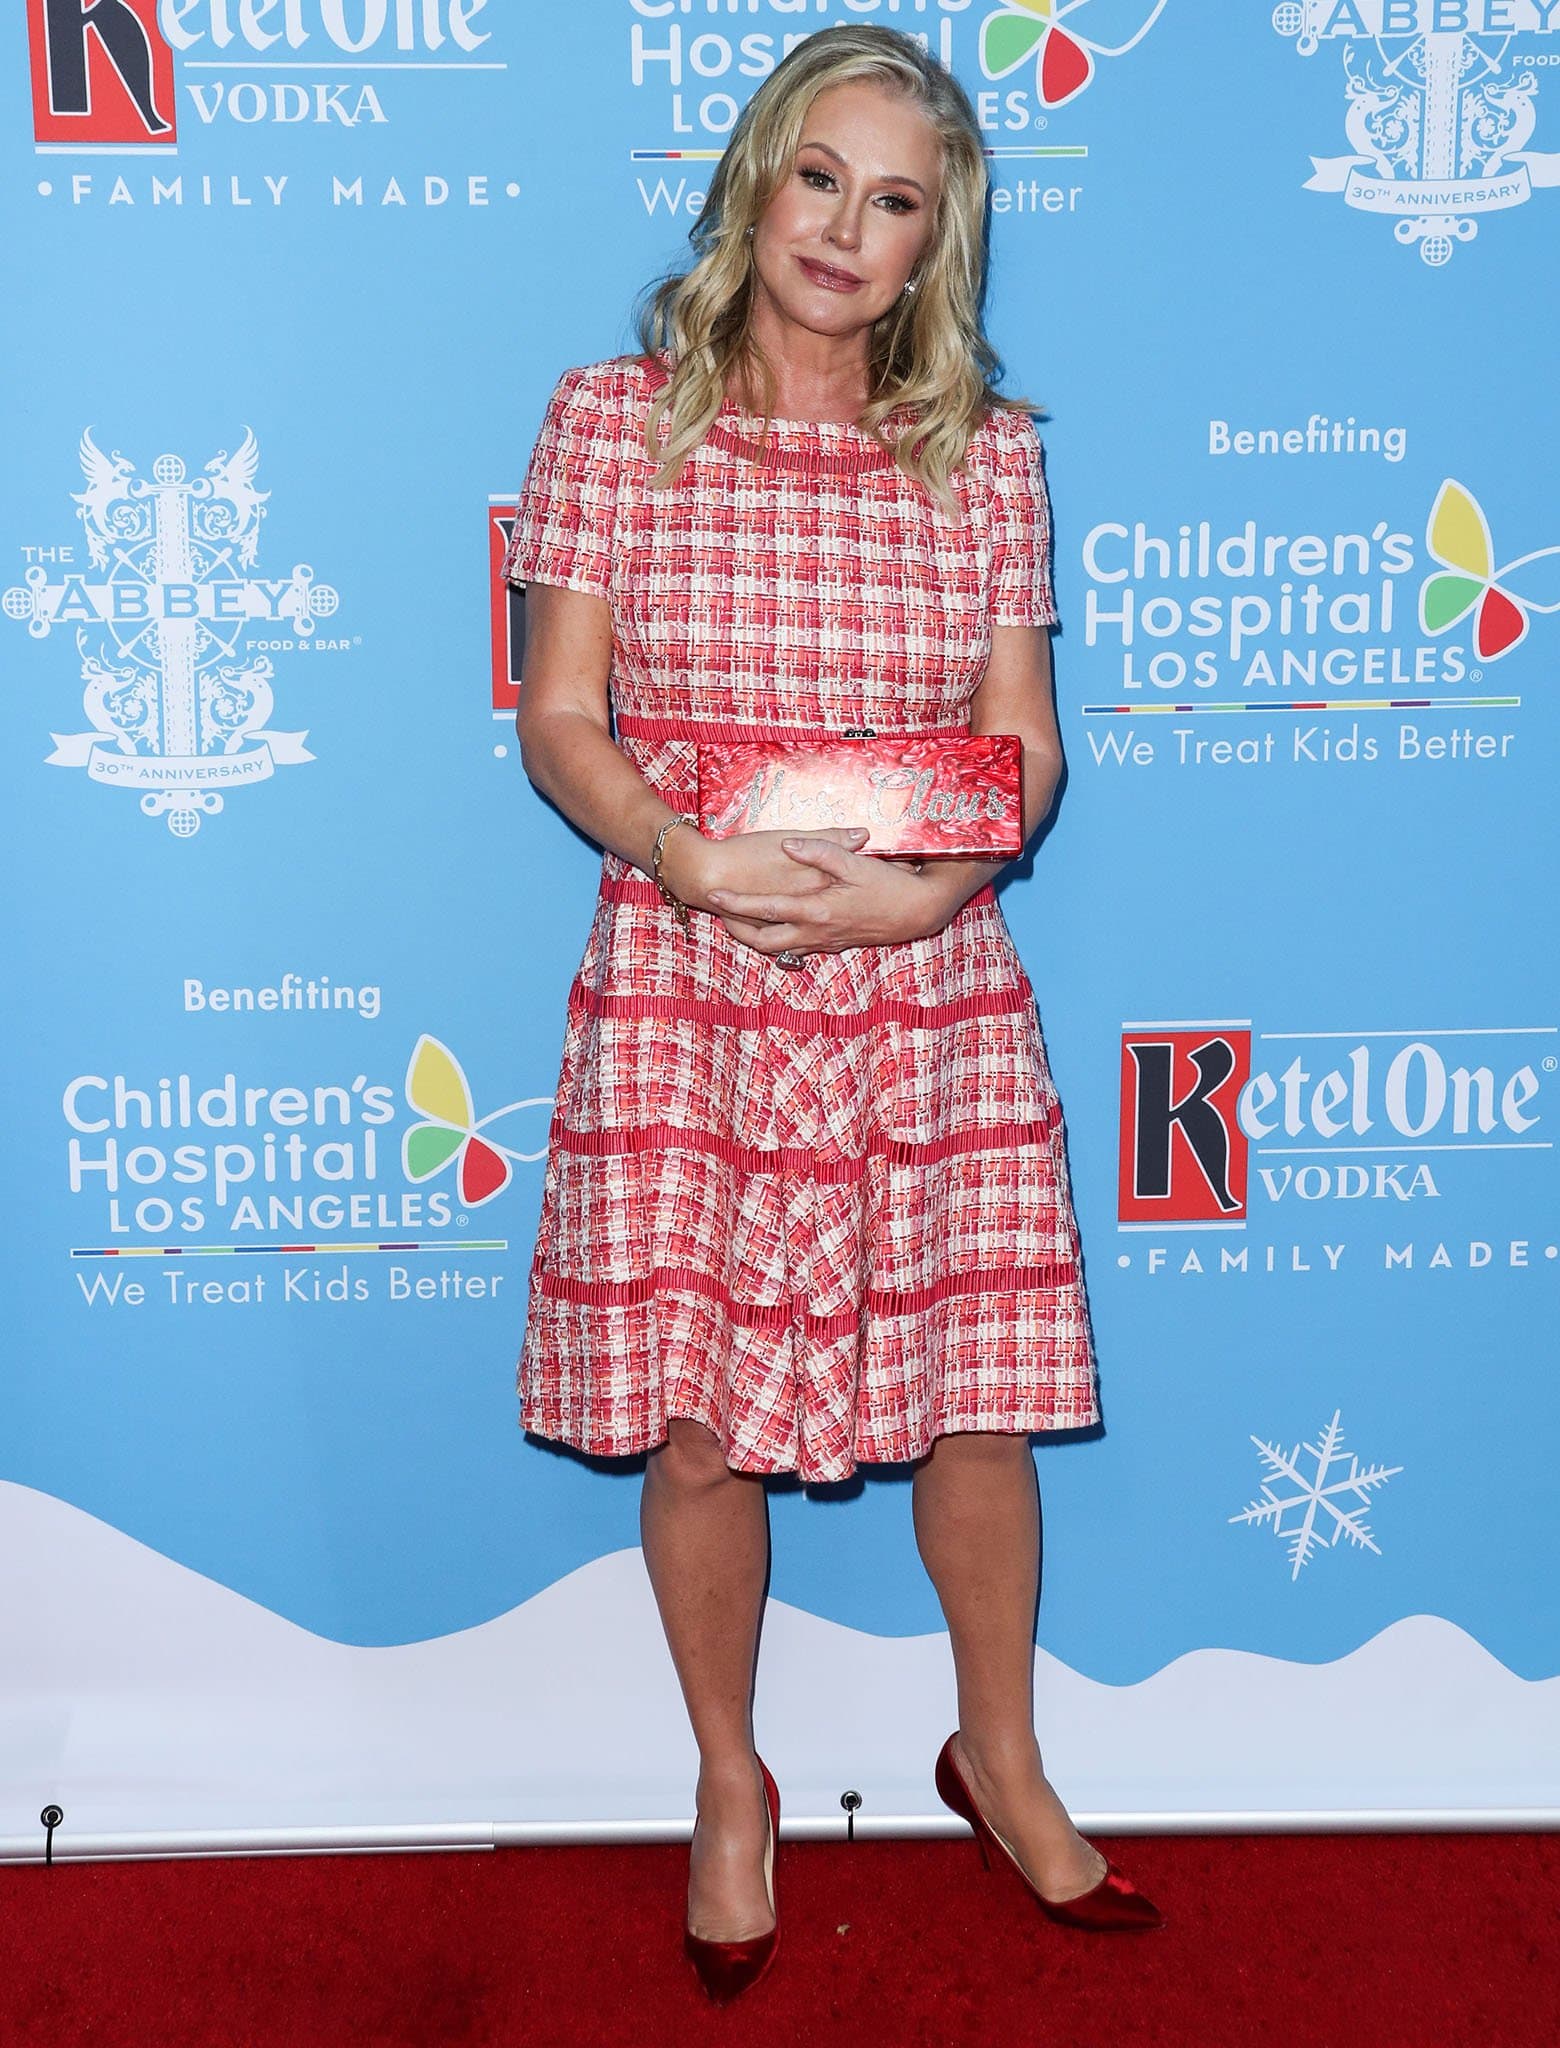 Kathy Hilton looks pretty in her red-and-white plaid tweed mini dress with matching red clutch and pumps